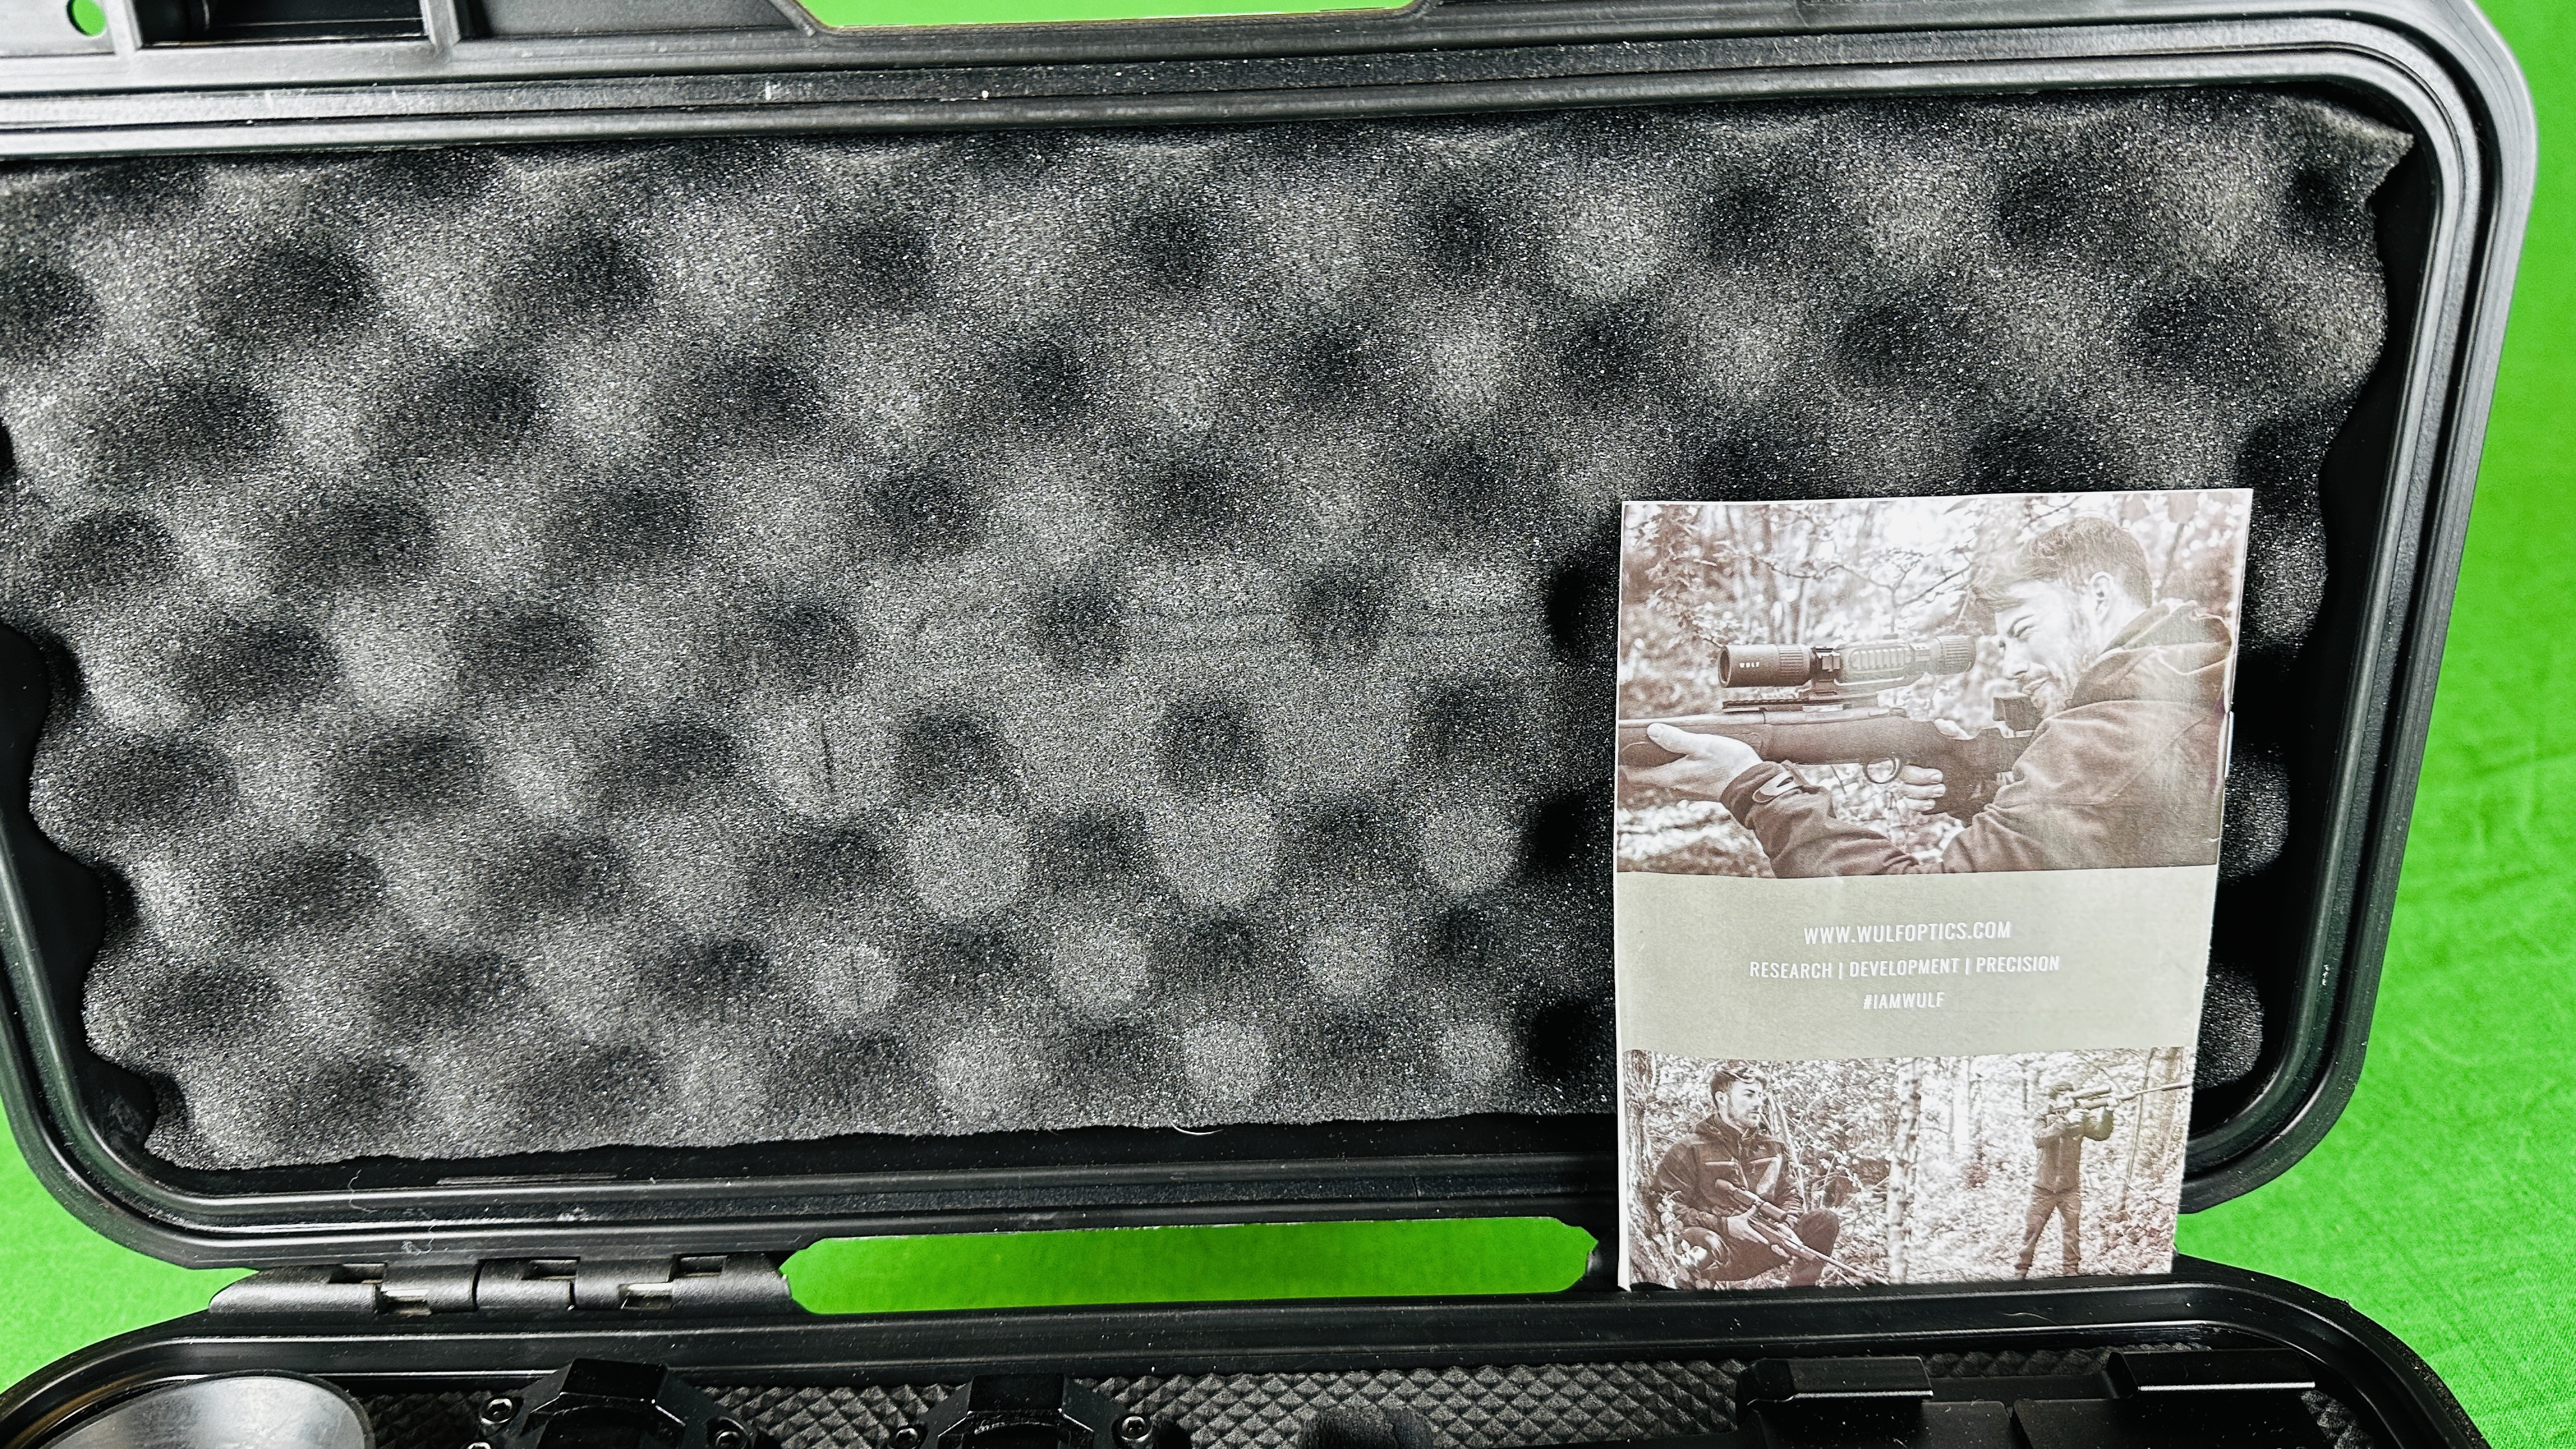 WULF 3-24X DAY/NIGHT VISION RIFLE SCOPE IN HARD SHELL CARRY CASE WITH ACCESSORIES. - Image 15 of 24